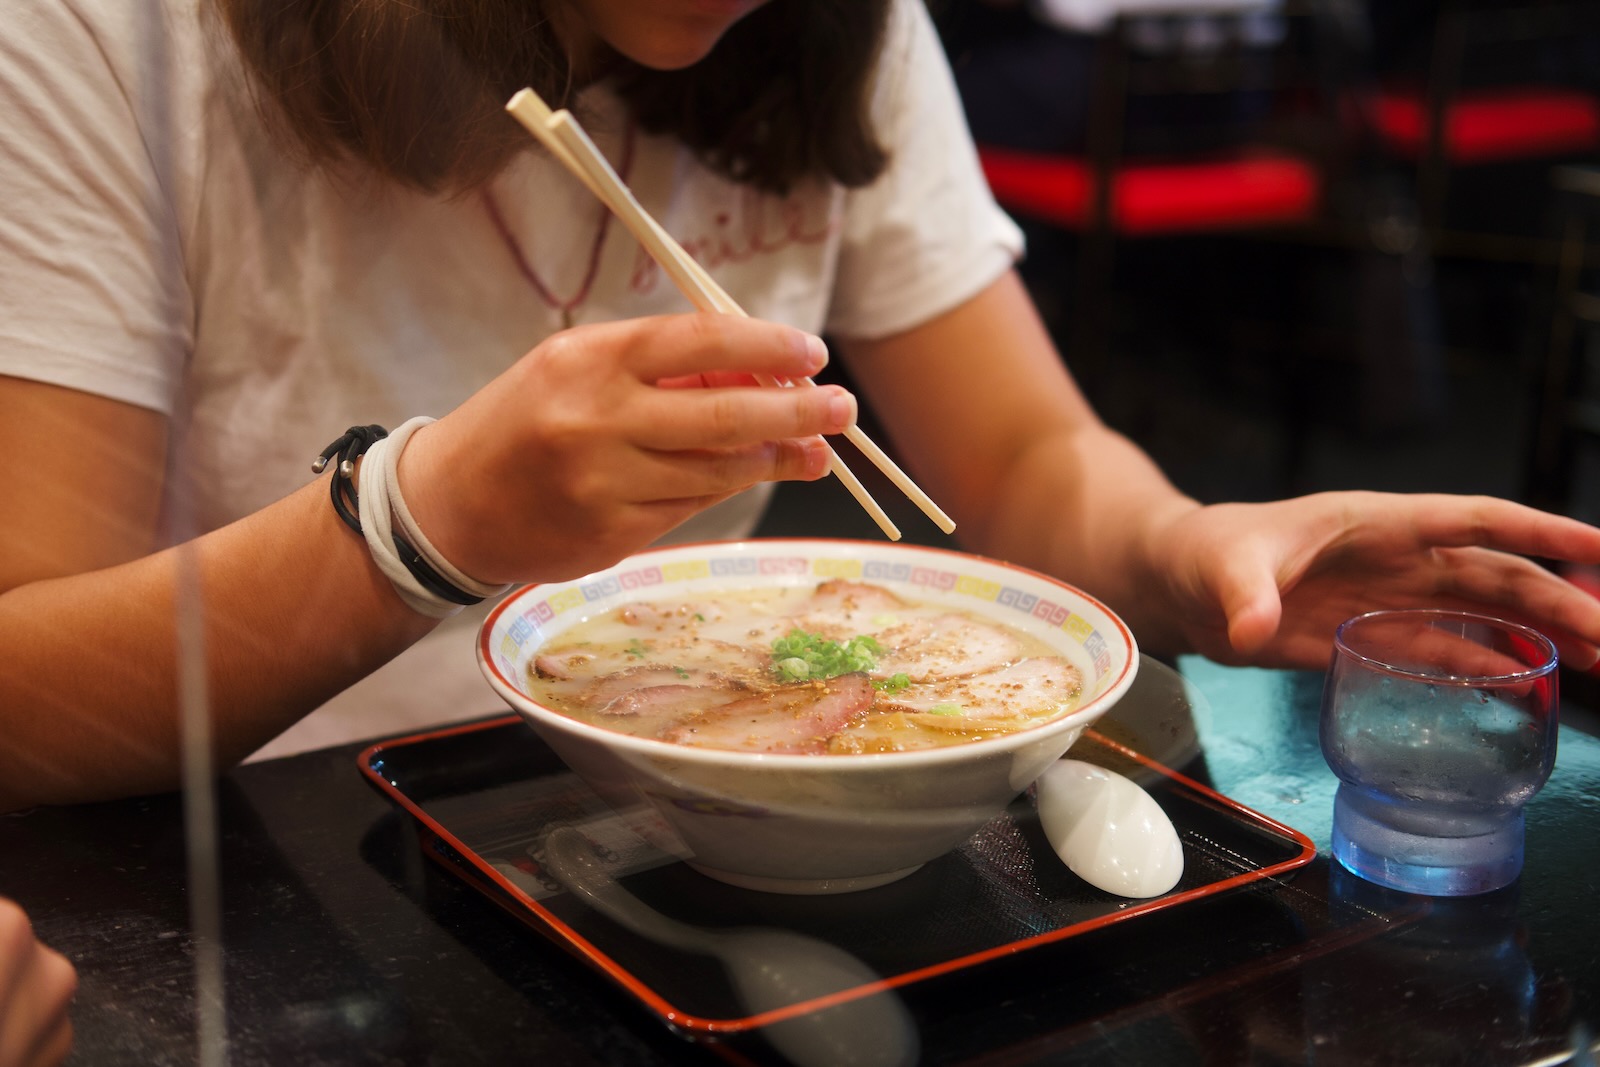 A girl holds chopsticks poised over a bowl of ramen.